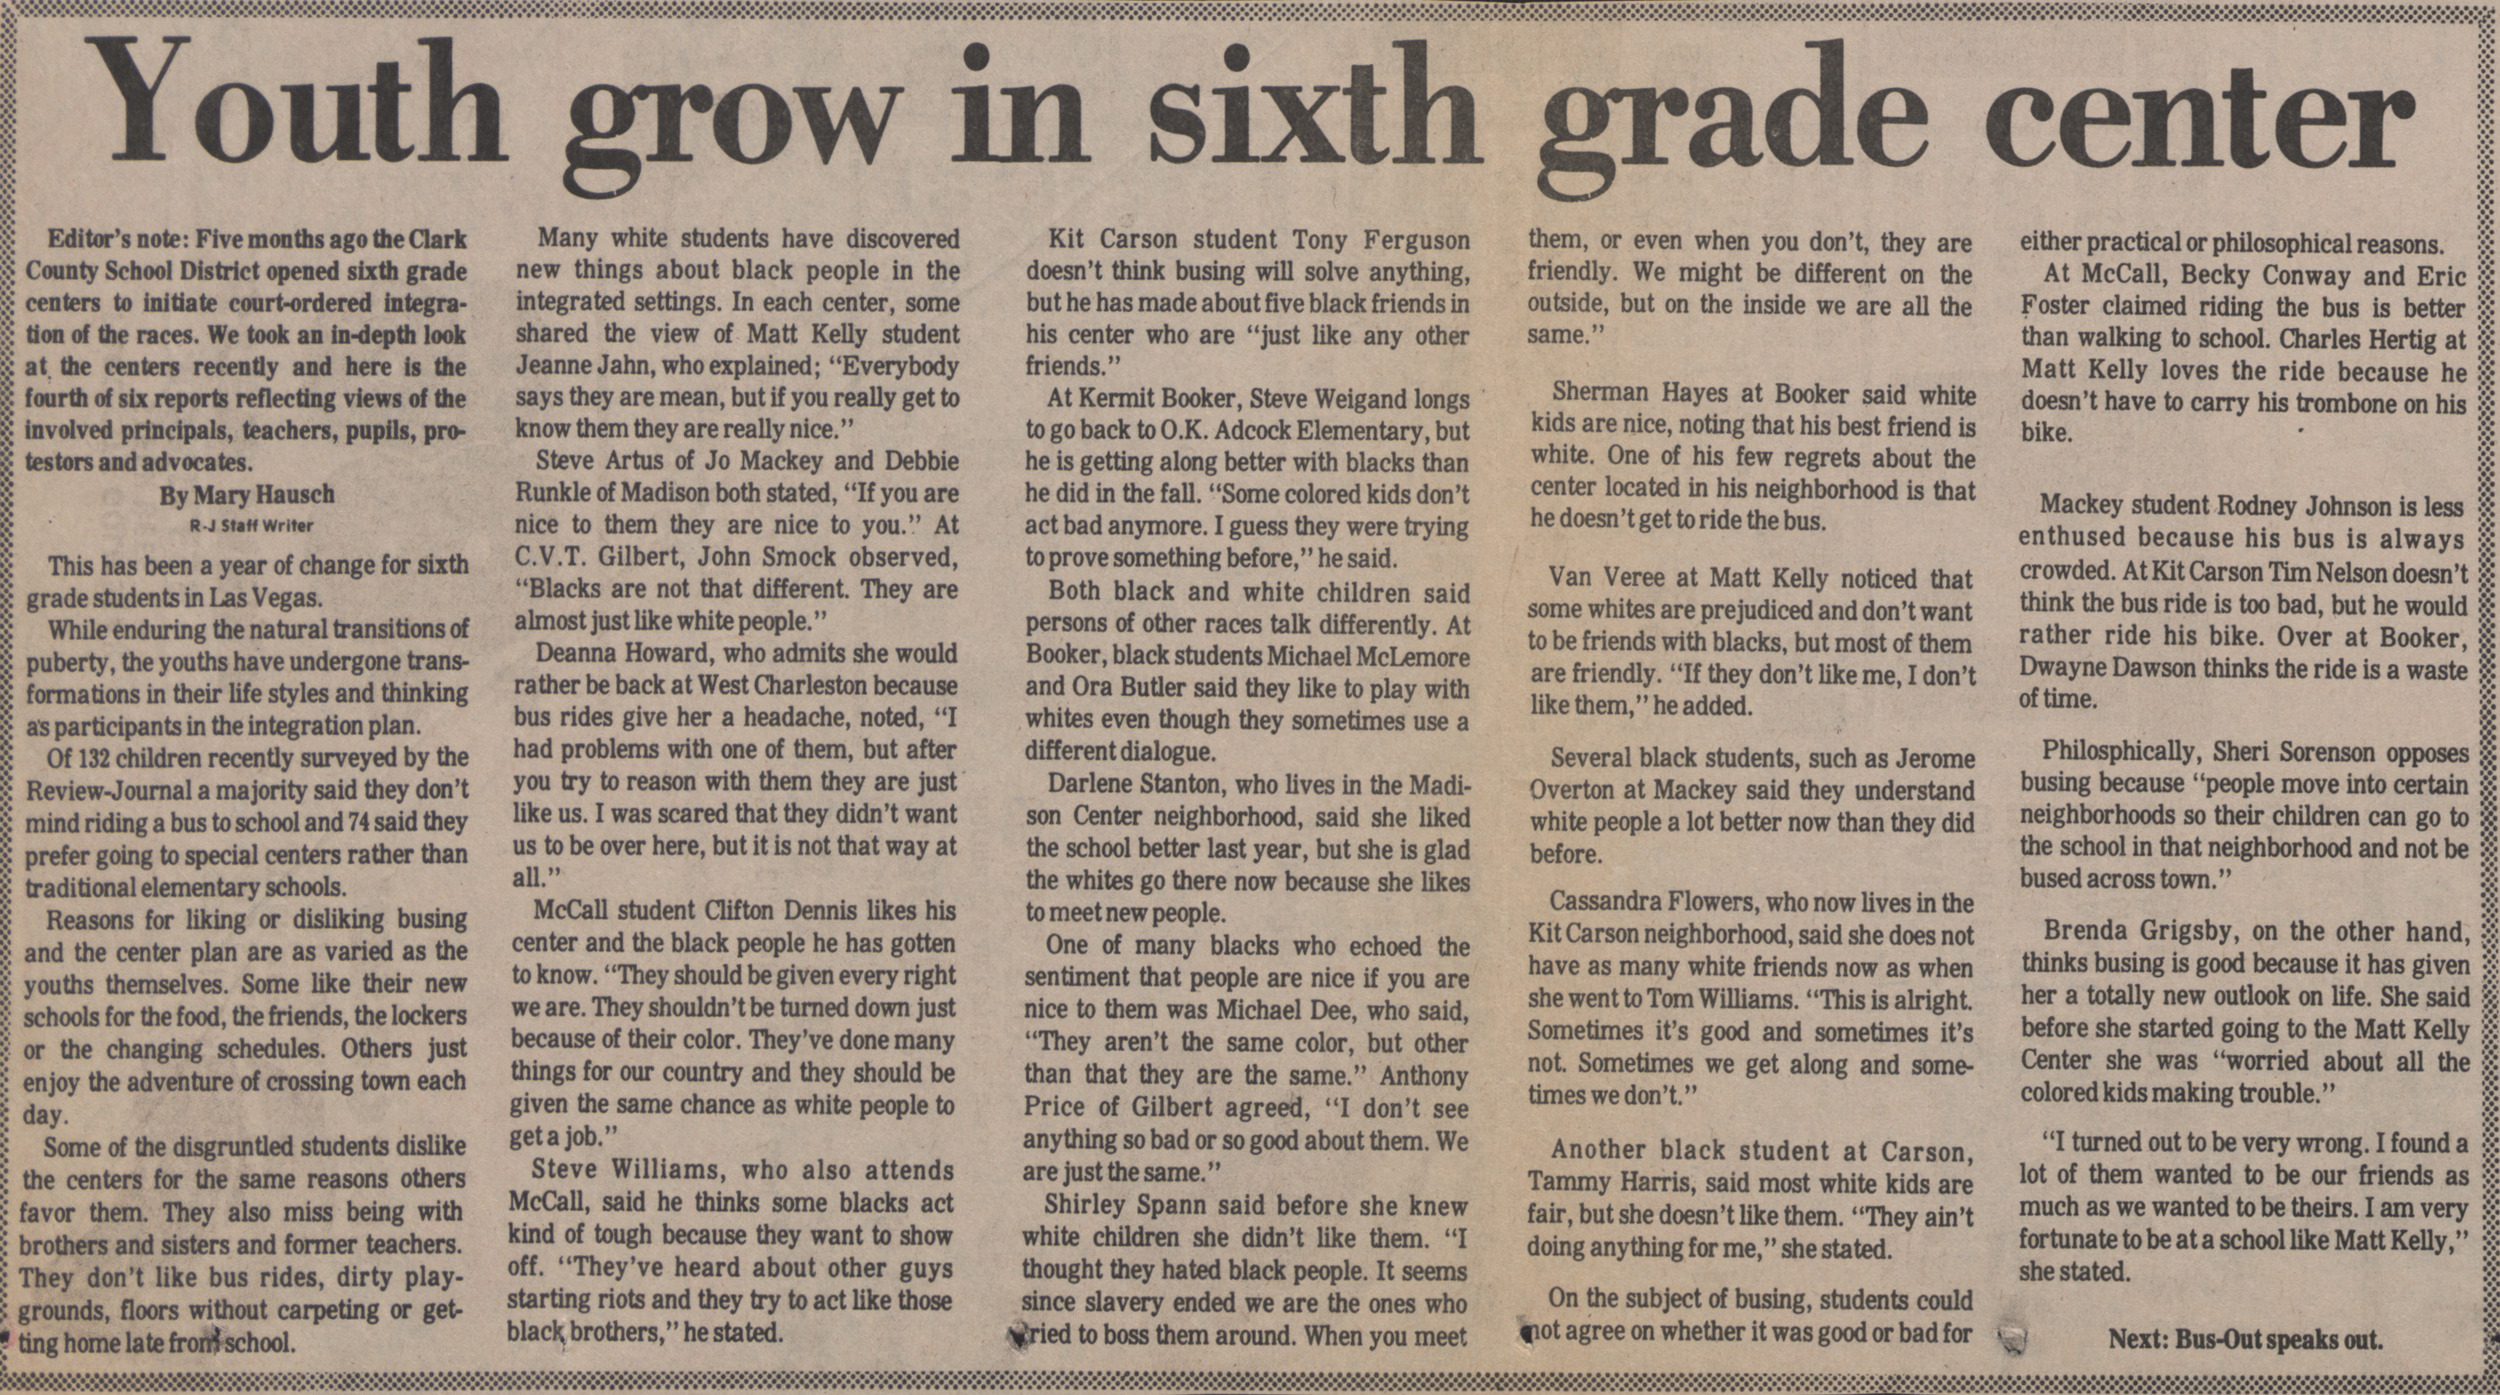 Newspaper clipping, Fourth of six reports, Youth grow in sixth grade center, Las Vegas Review-Journal, February 22, 1973